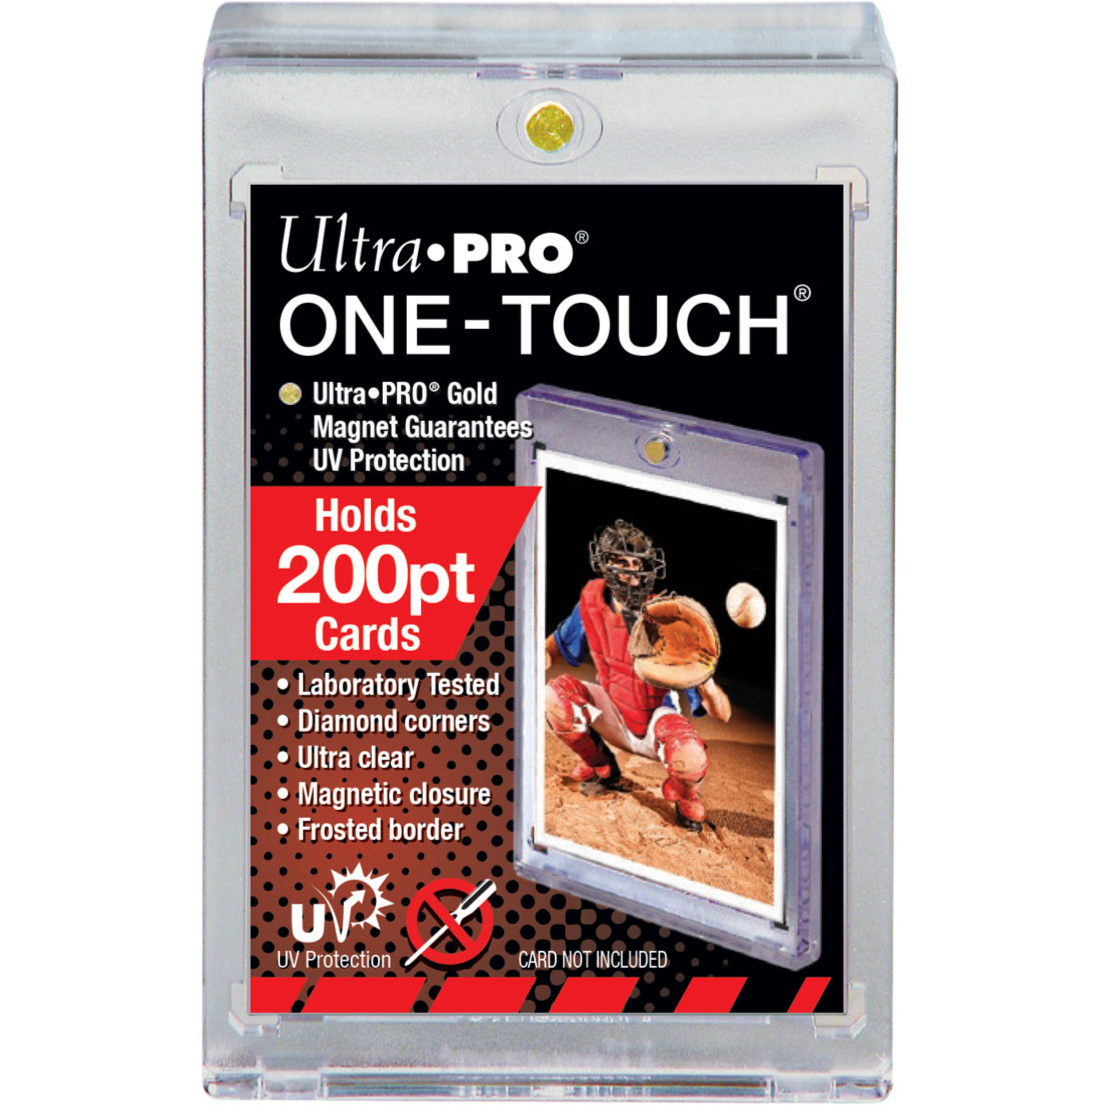  Ultra-Pro 200pt ONE-TOUCH Magnetic Card Holder UV Protection  Local Legends Cards & Collectibles